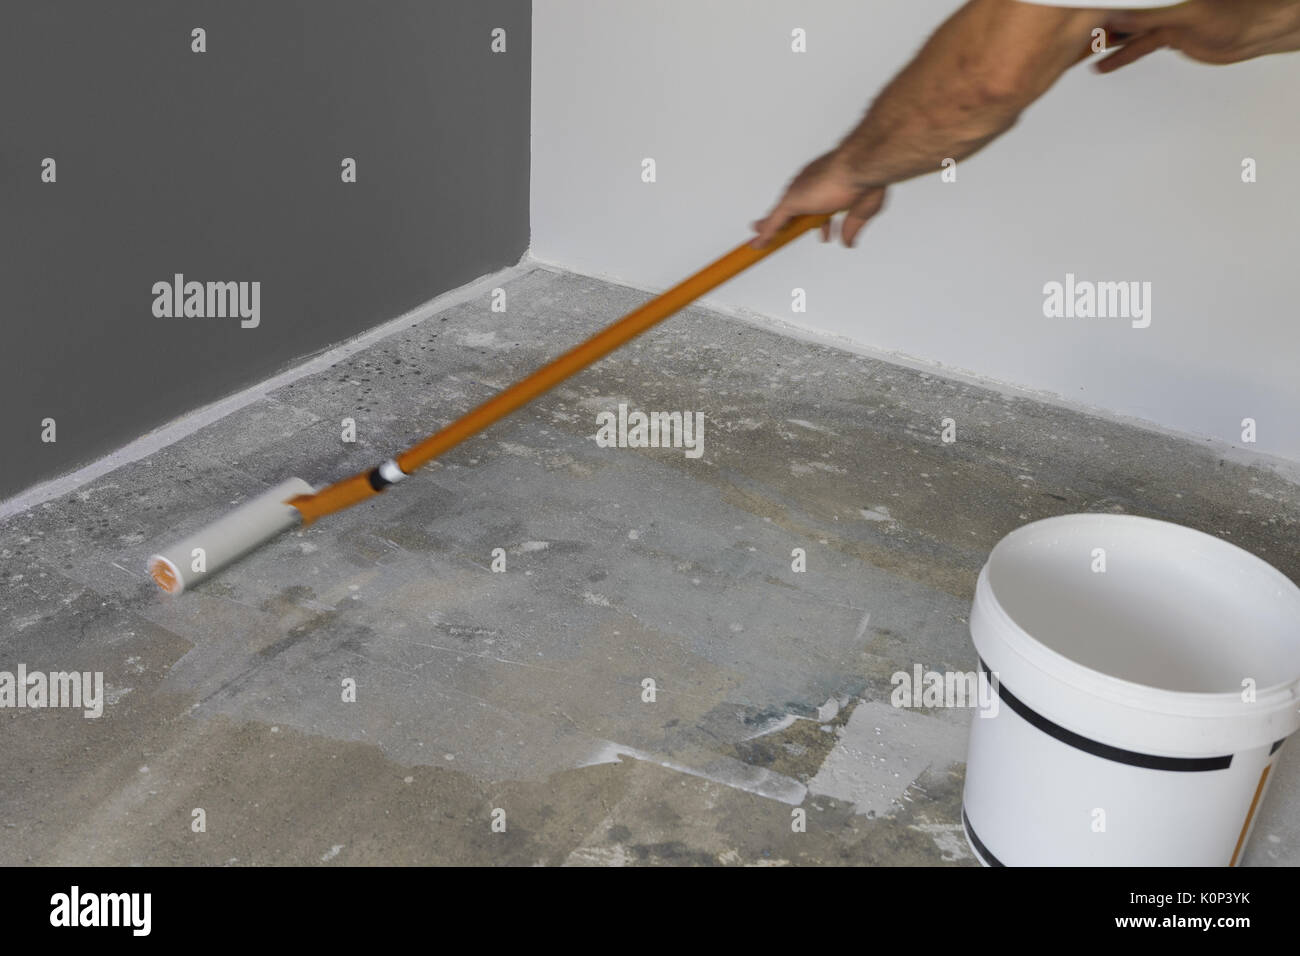 Master Laid The Foundation For Floor Screed Repair Of An